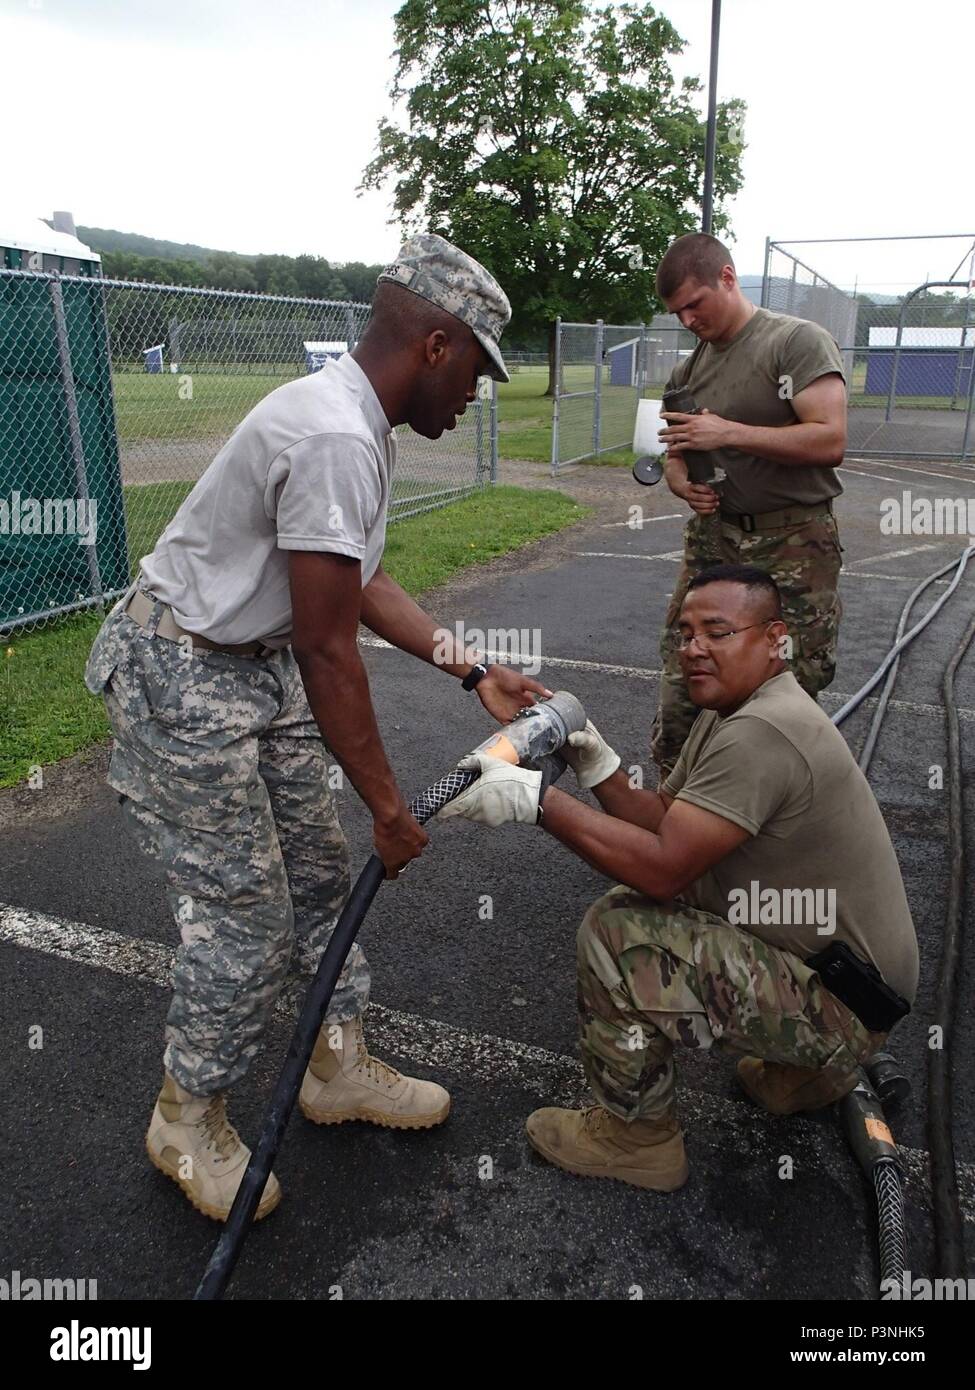 Soldiers from Company A, 48th Combat Support Hospital out of Fort Story, Va., set up electricity for the tents for veterinary services in preparation for Greater Chenango Cares July 14, 2016. Greater Chenango Cares is one of the Innovative Readiness Training missions which provides real-world training in a joint civil-military environment while delivering world-class medical care to the people of Chenango County, N.Y., from July 15-24. Stock Photo